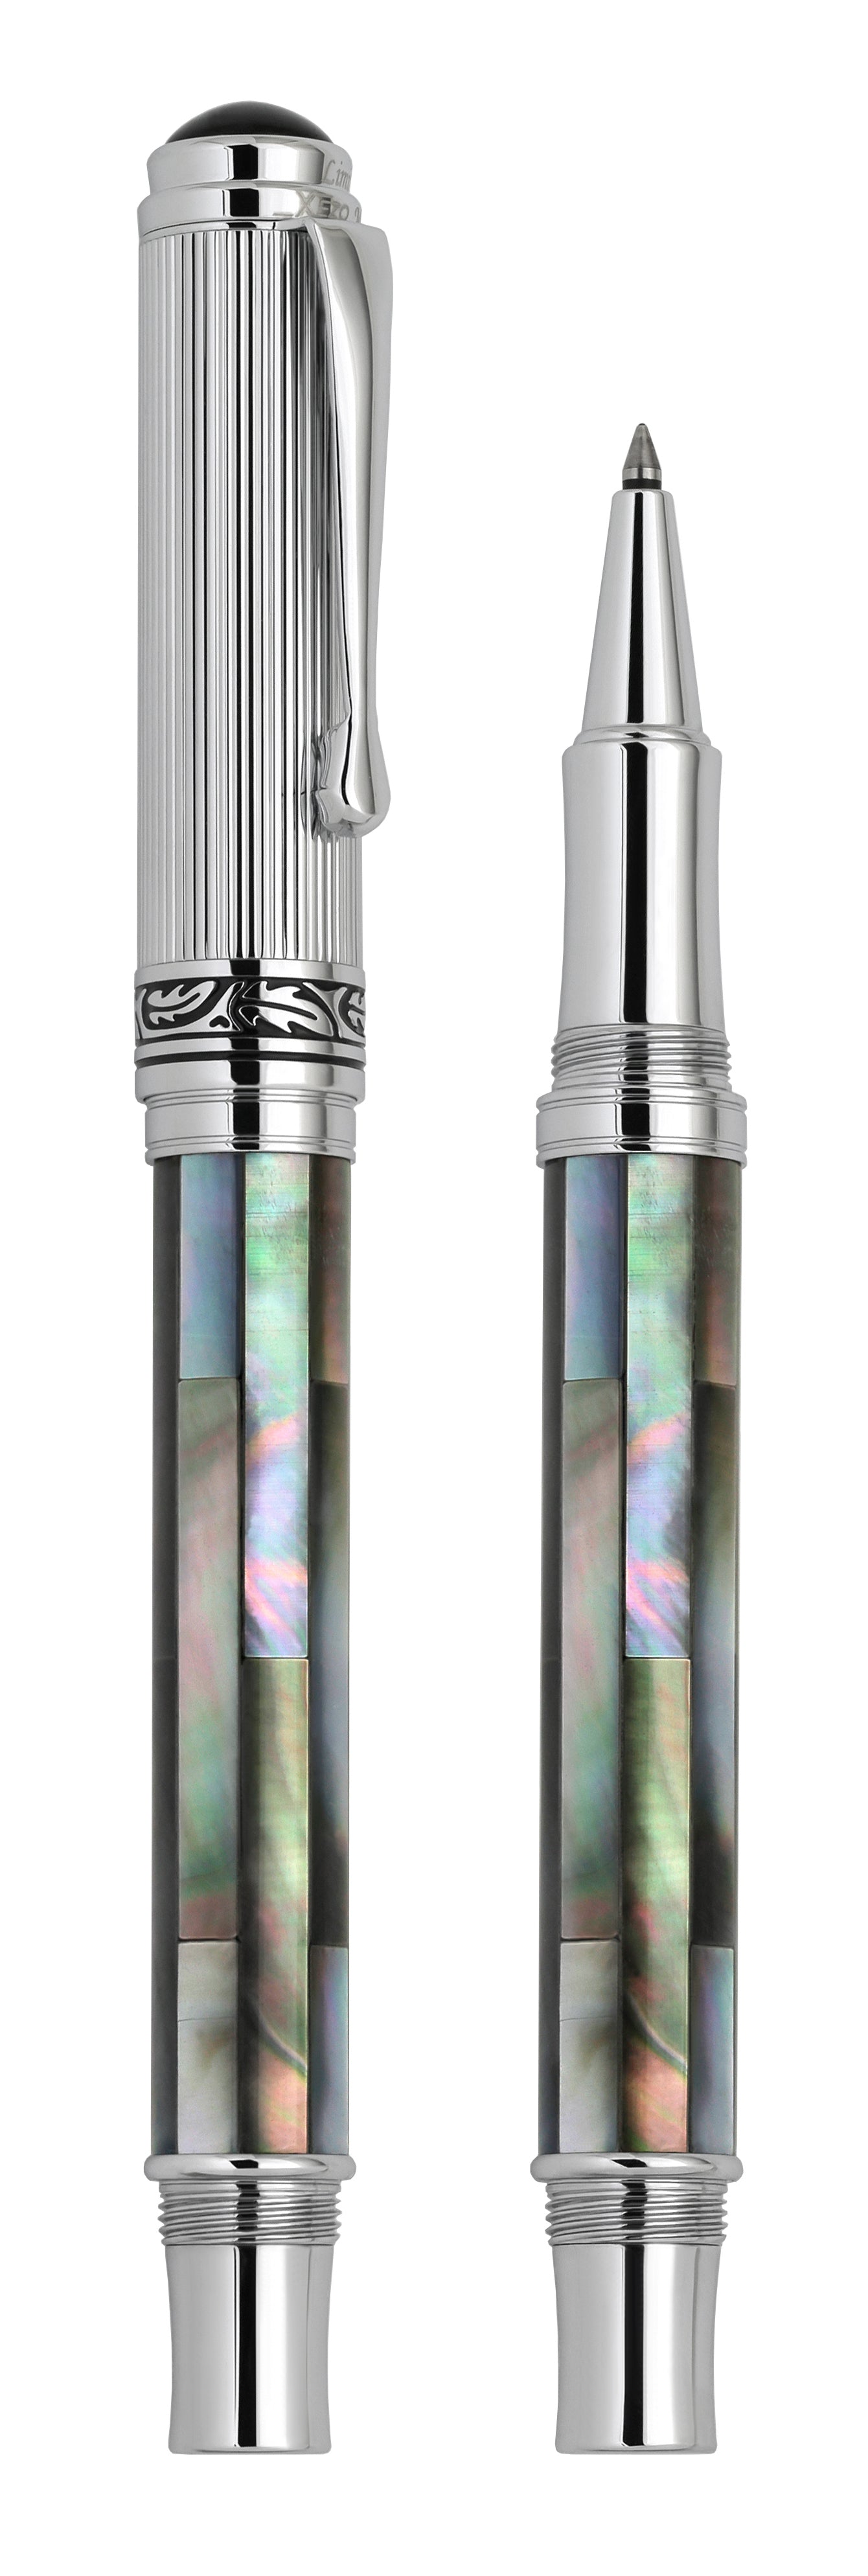 Vertical view of two Maestro Black MOP Chrome R rollerball pens. The pen on the left is capped, and the pen on the right has no cap